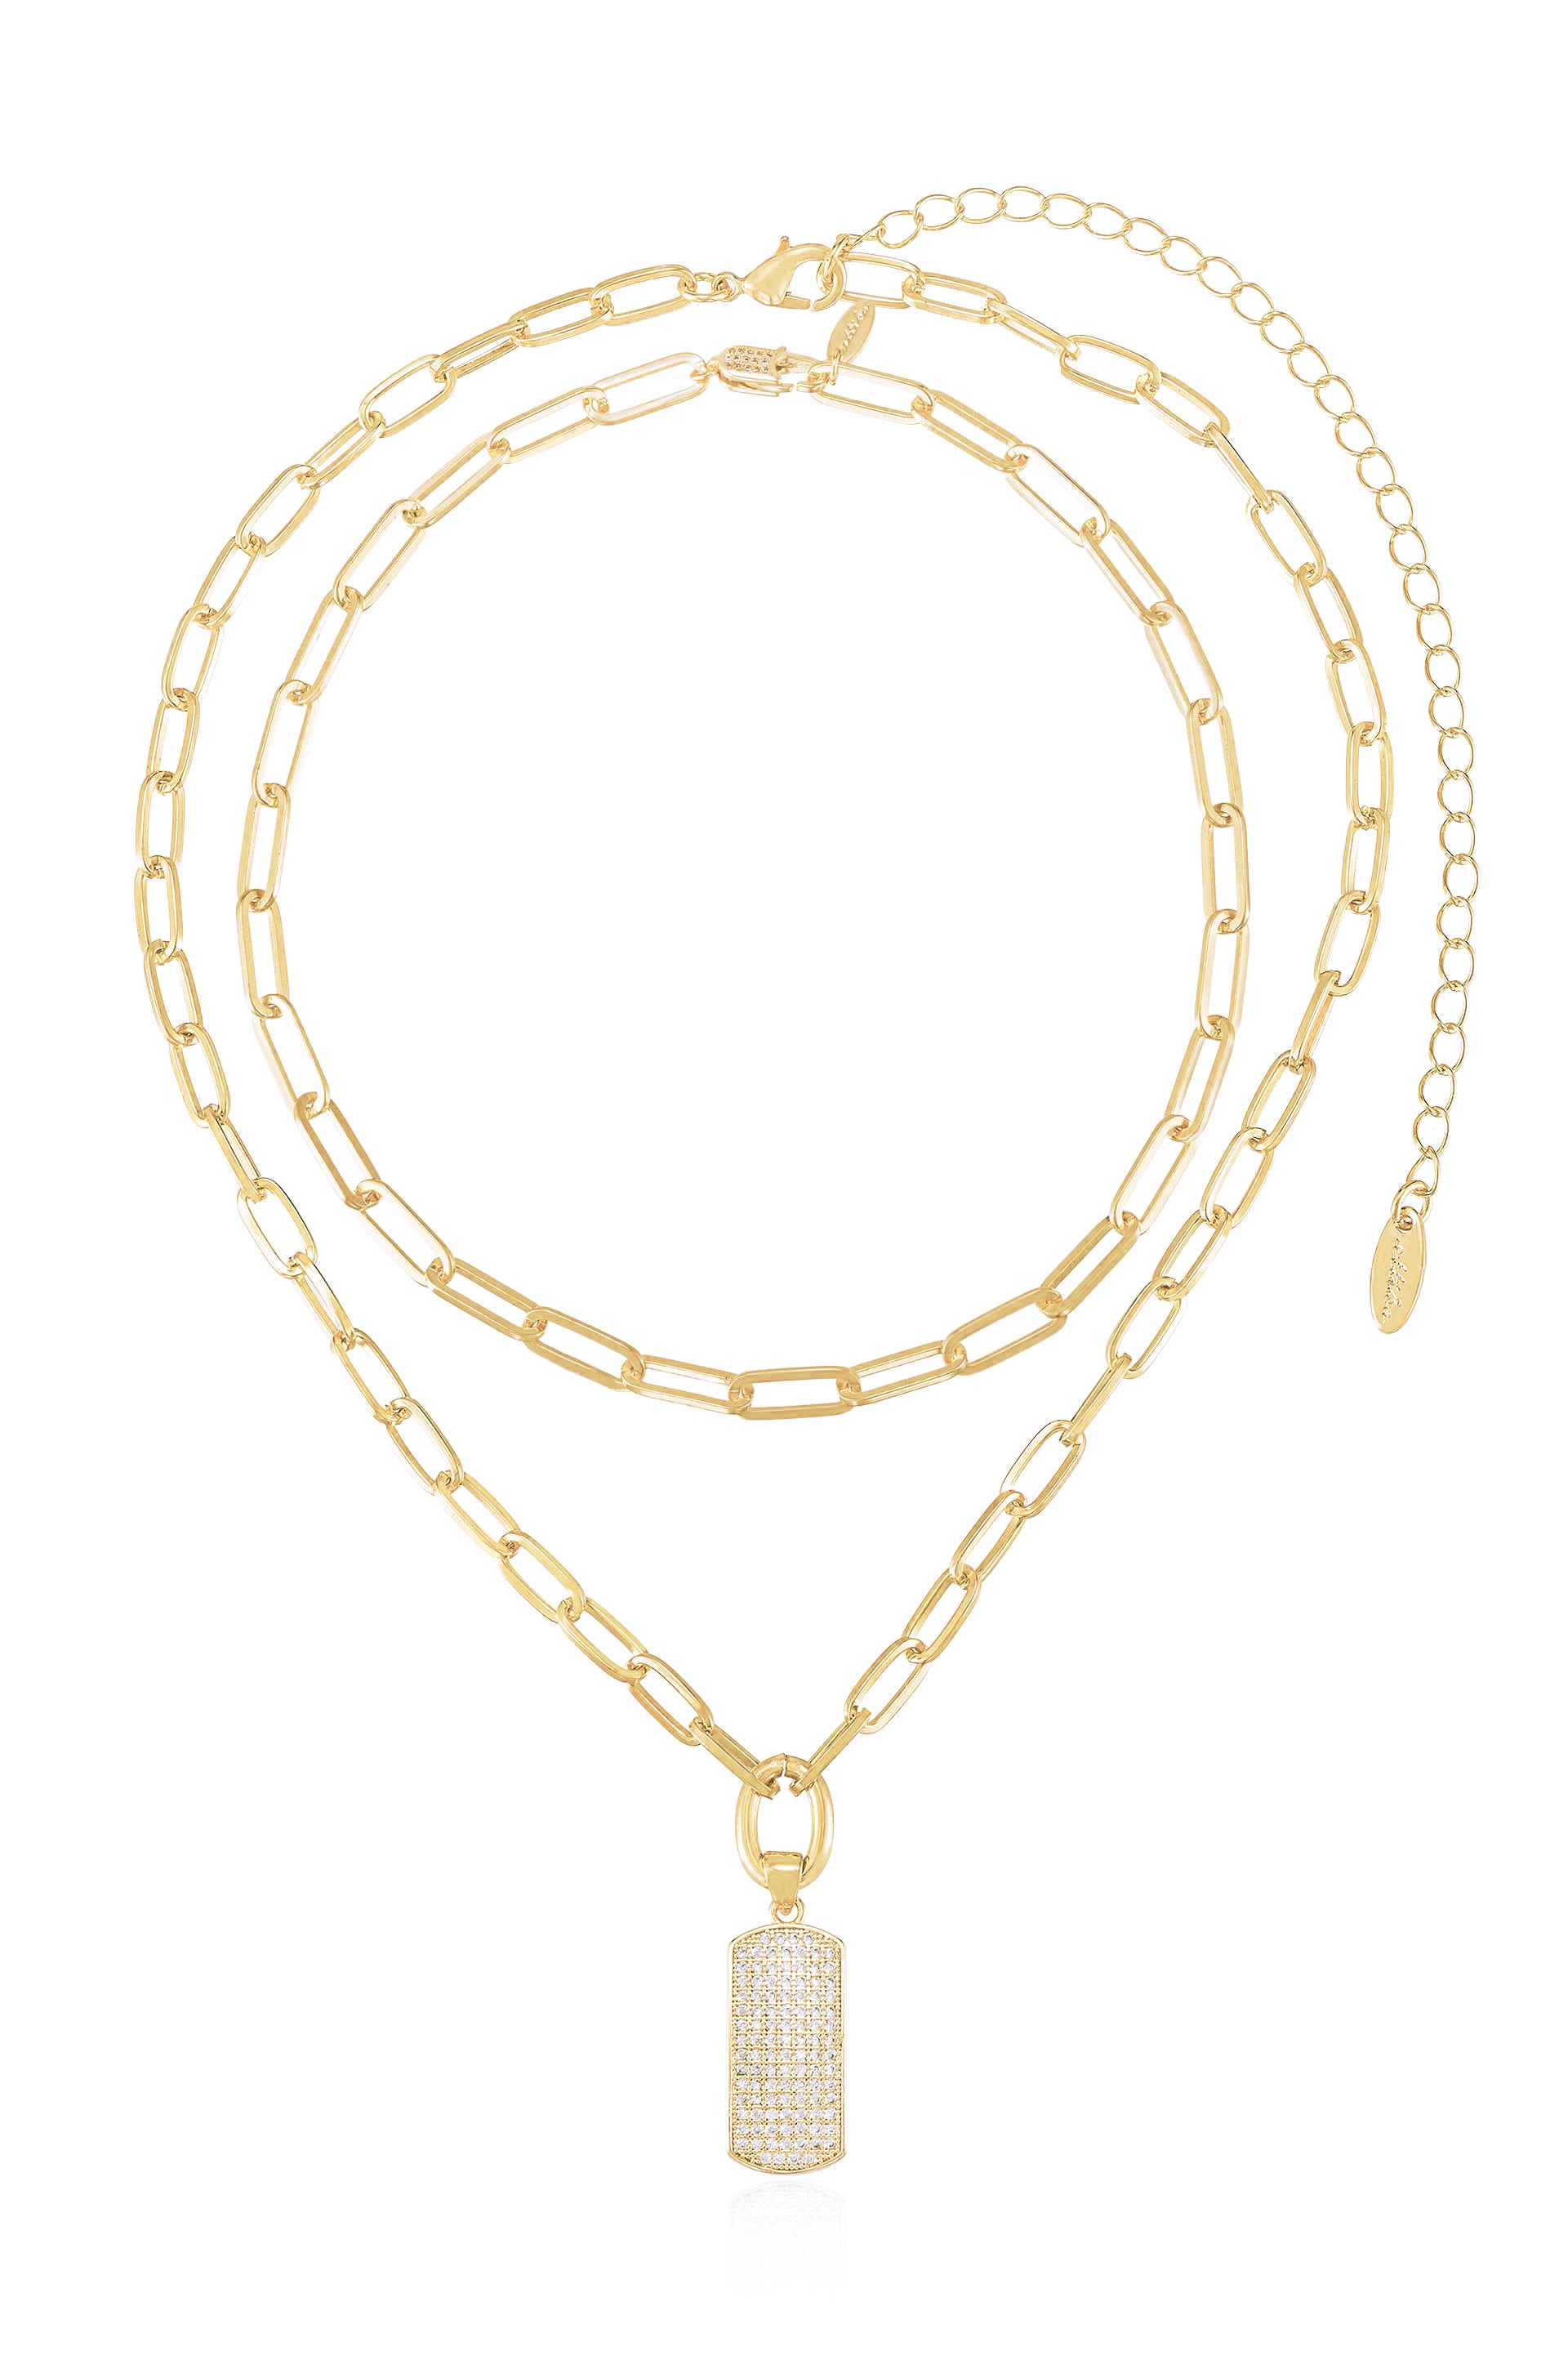 Linked Up Crystal Pendant 18k Gold Plated Layered Necklace Set full